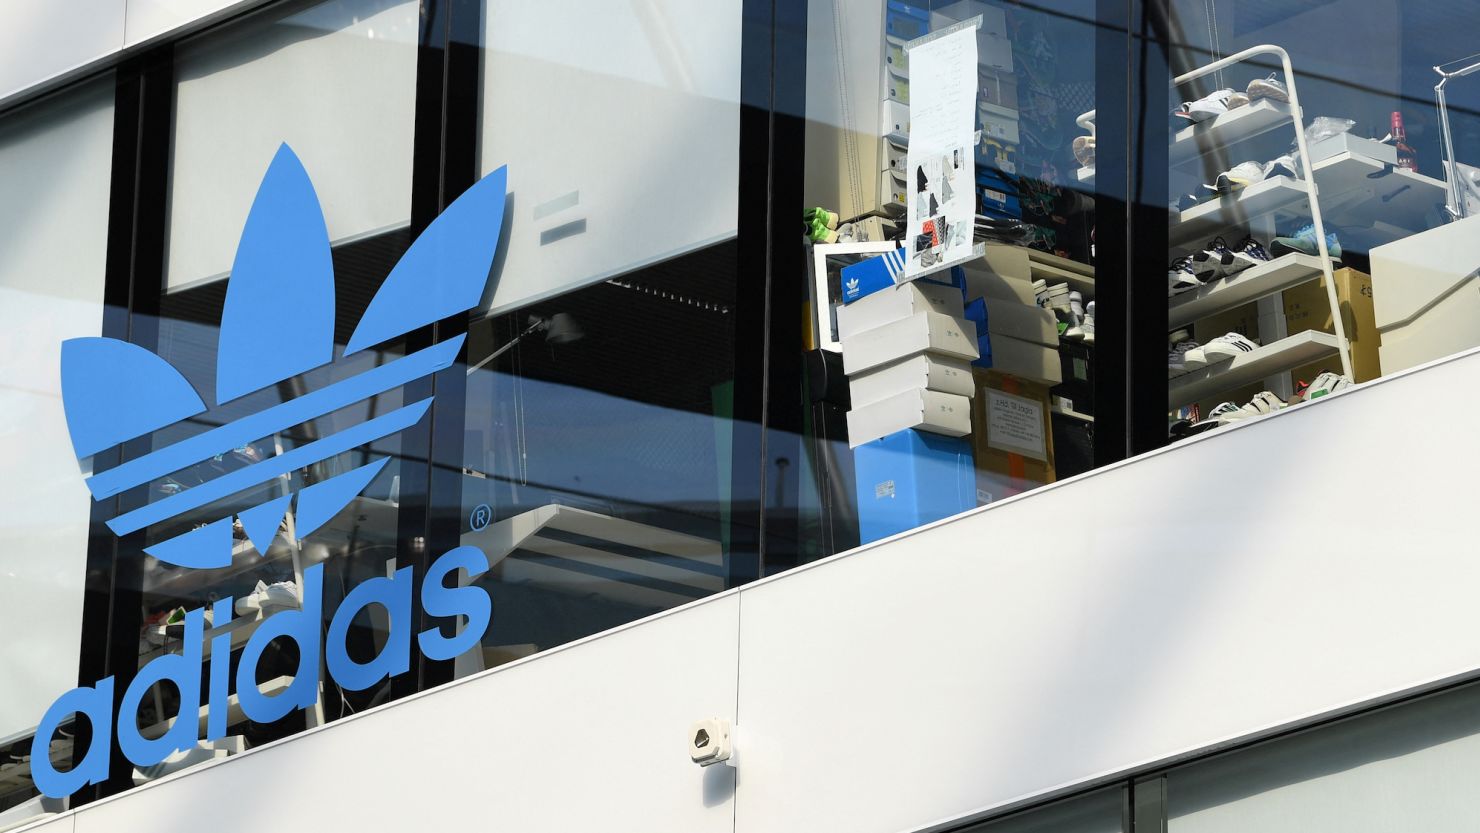 The Adidas logo at the company's headquarters in Herzogenaurach, Germany, photographed on August 9, 2019